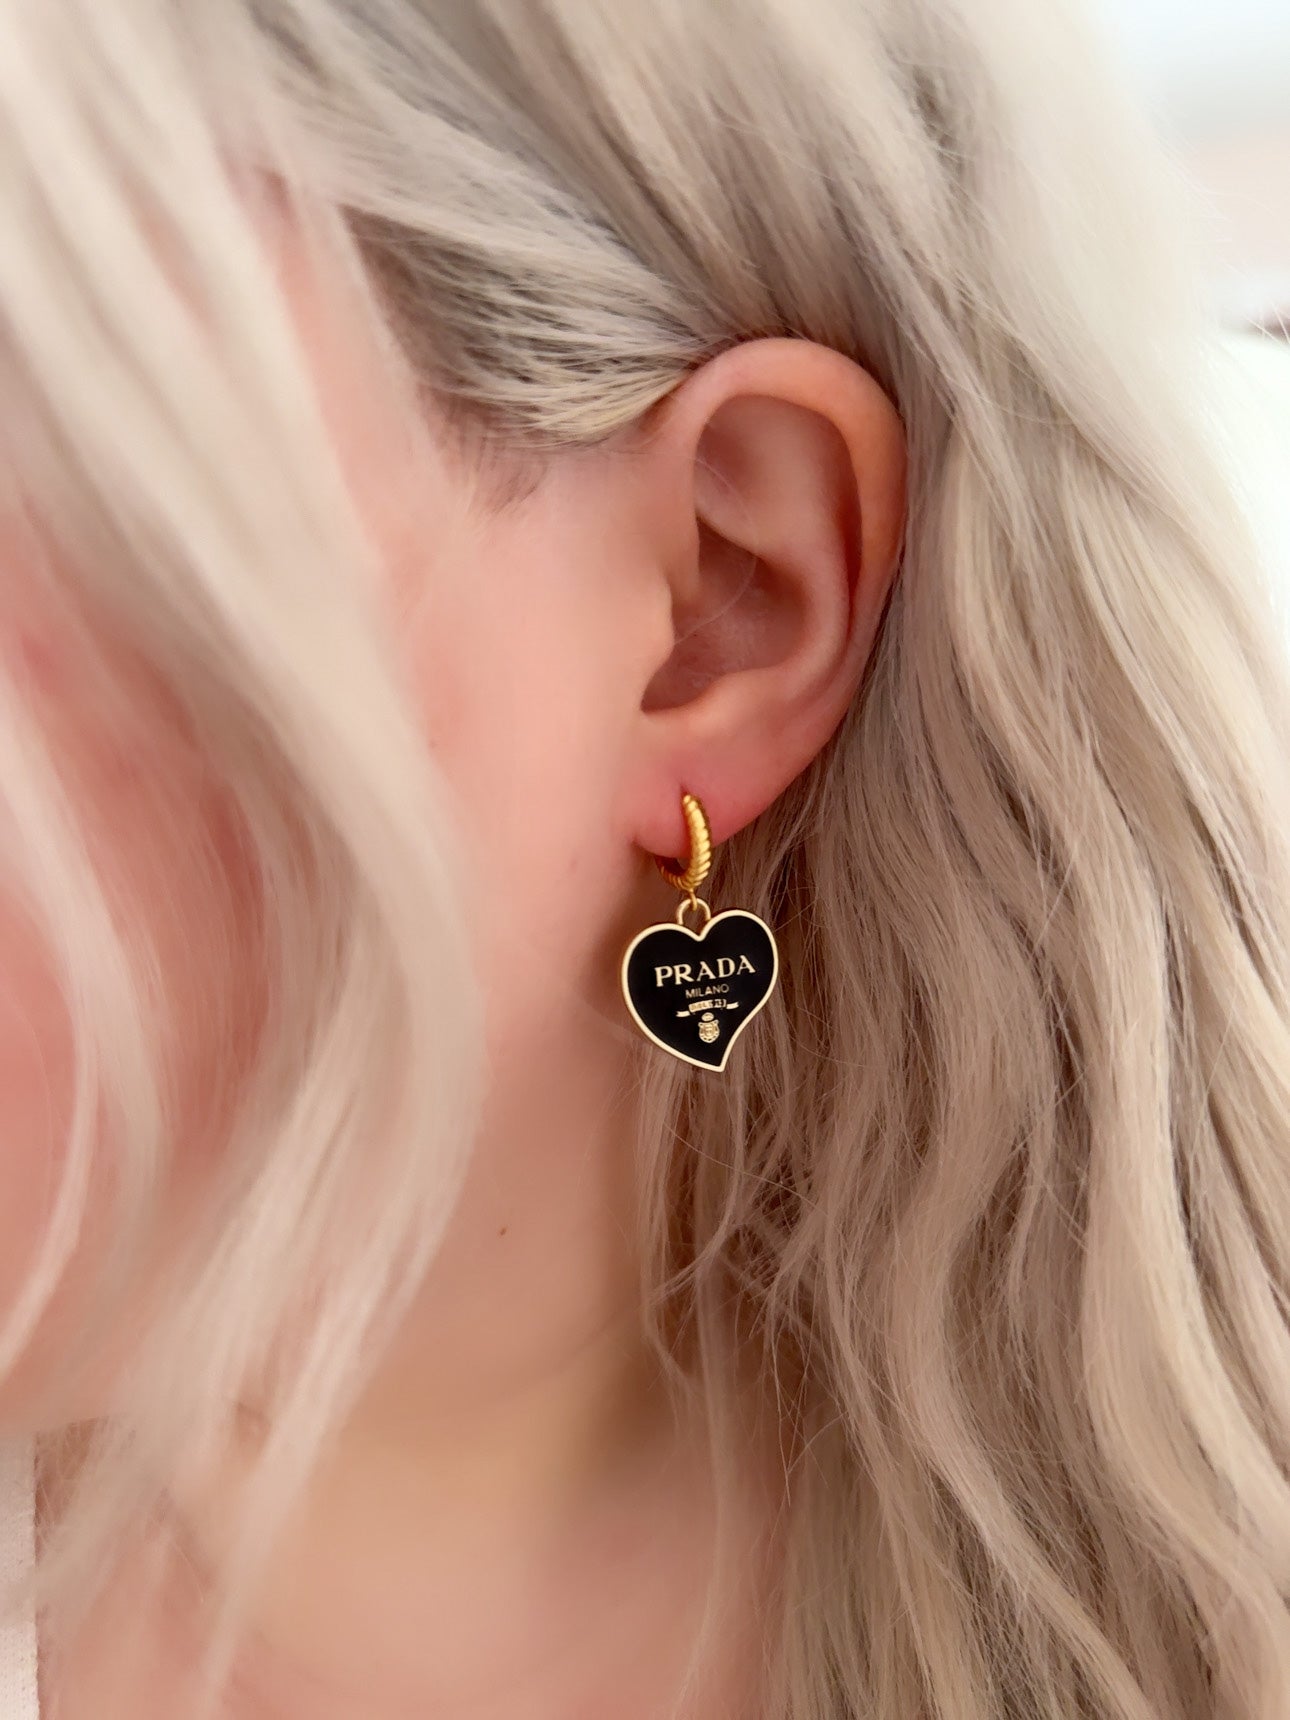 The “Amore” Earrings